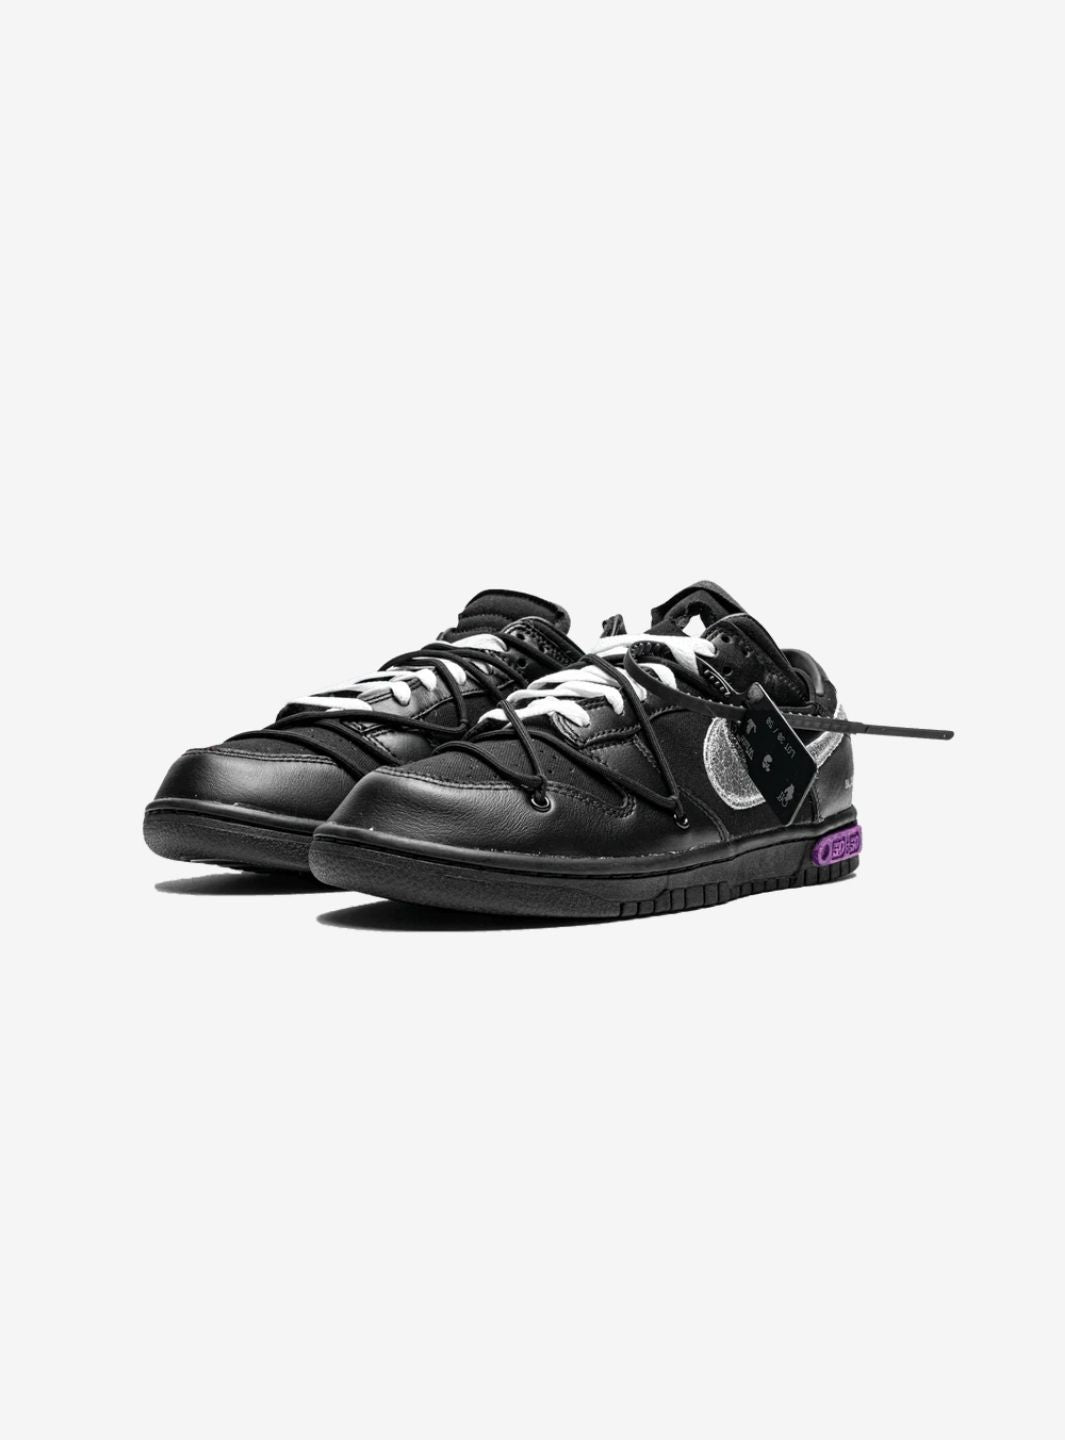 Nike Dunk Low Off-White Lot 50 - DM1602-001 | ResellZone